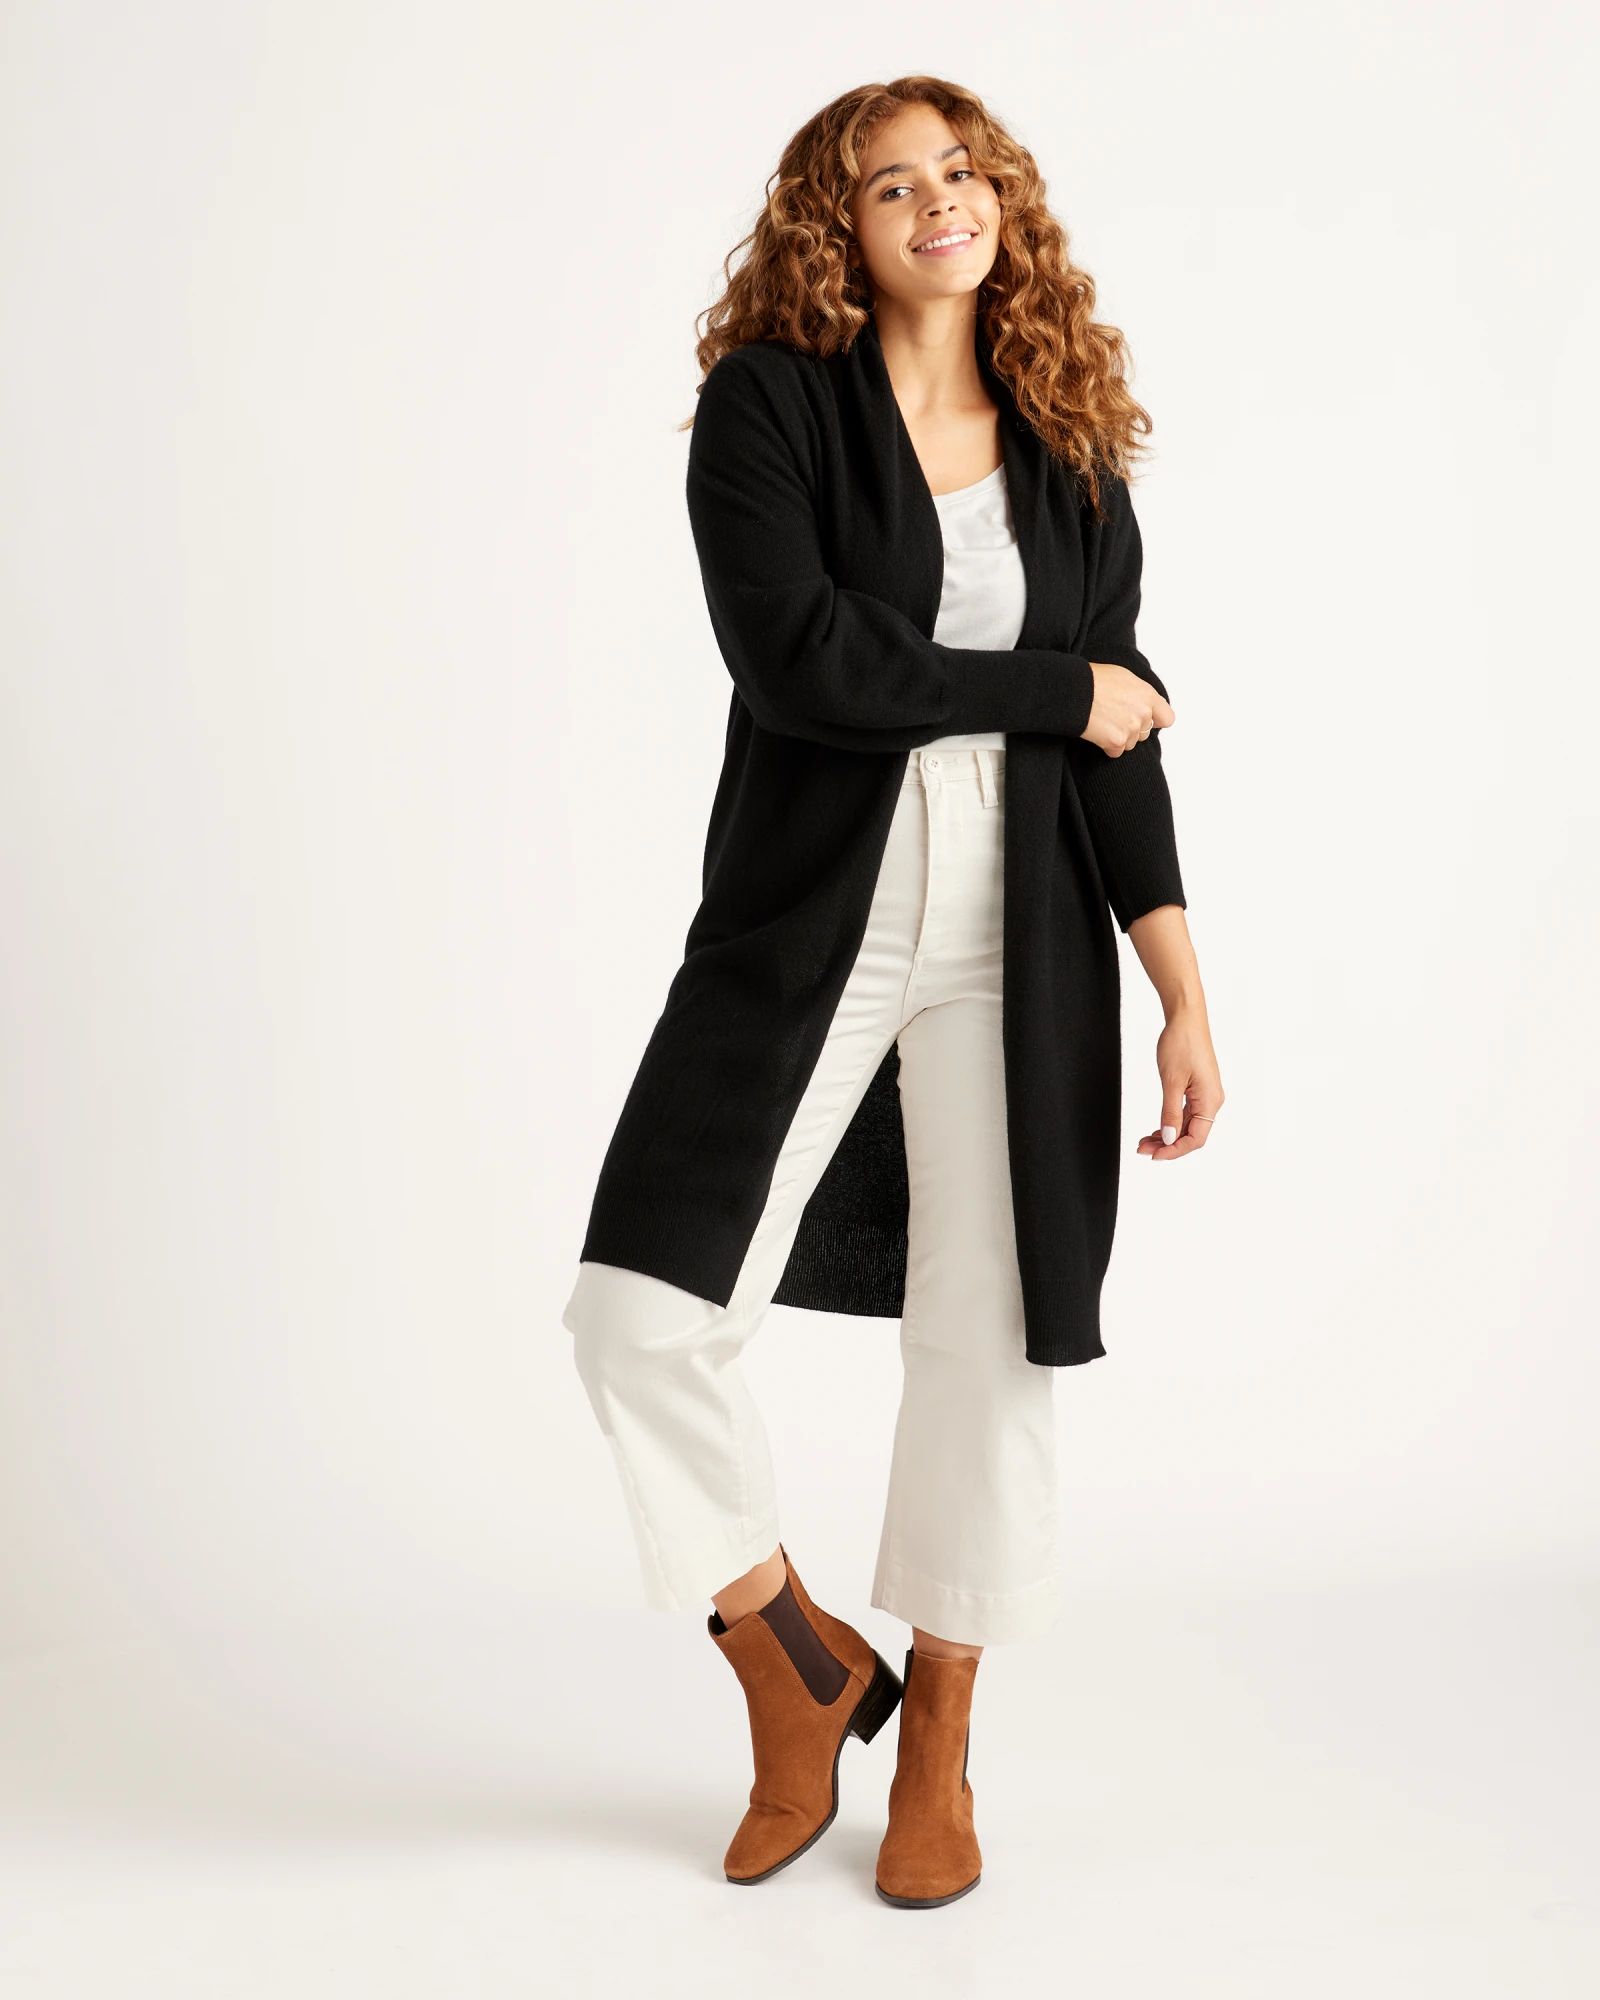 Mongolian Cashmere Duster Cardigan Sweater | Quince